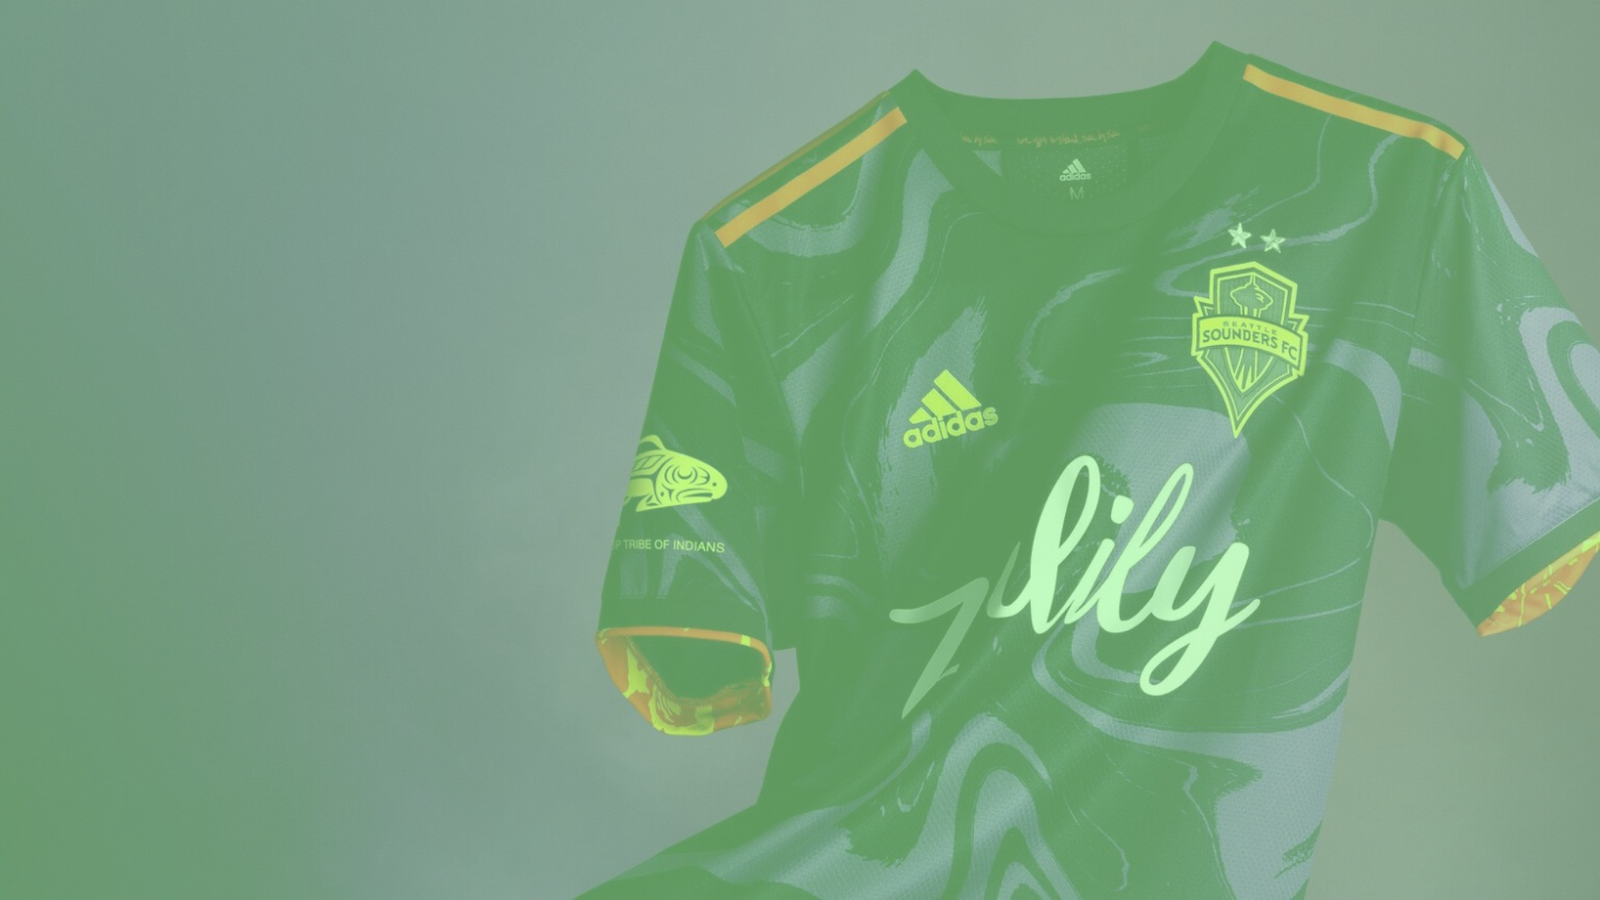 2021 MLS Kit Overview: All 27 Team's (Adidas) Jerseys Released